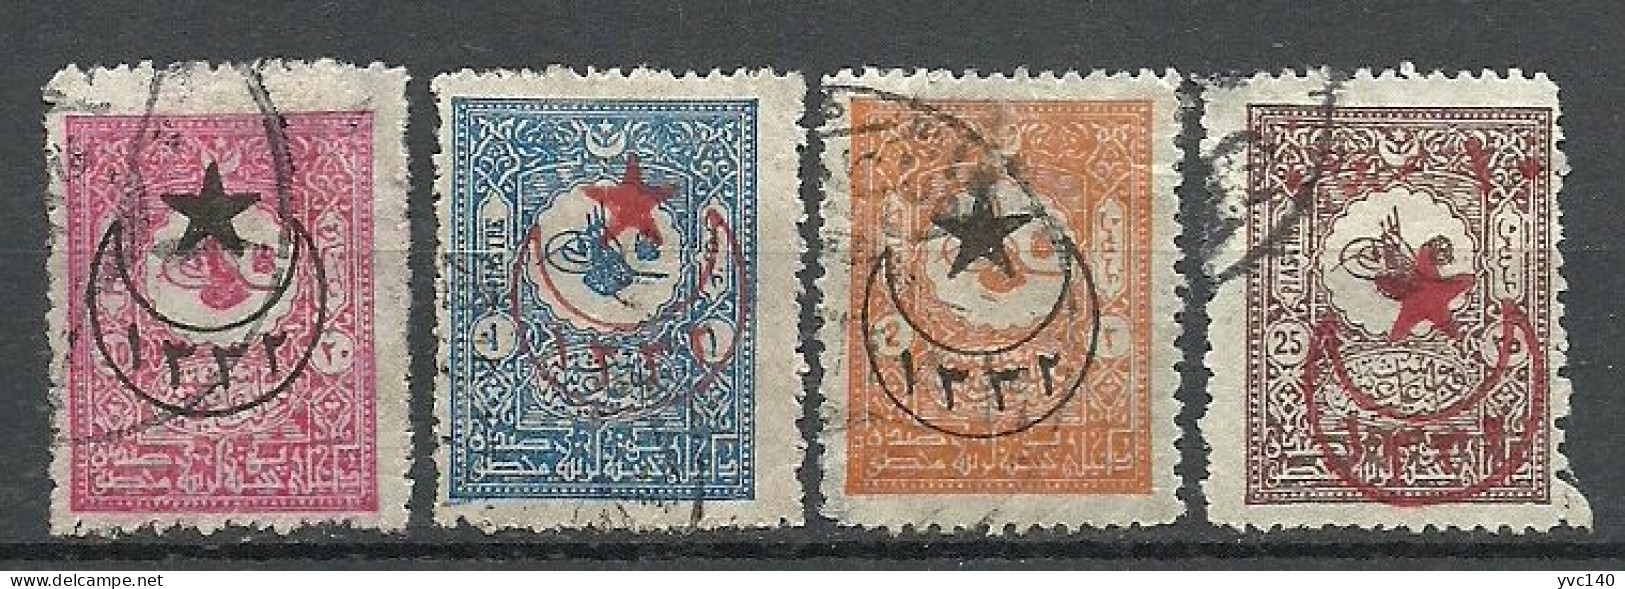 Turkey; 1916 Overprinted War Issue Stamps - Used Stamps